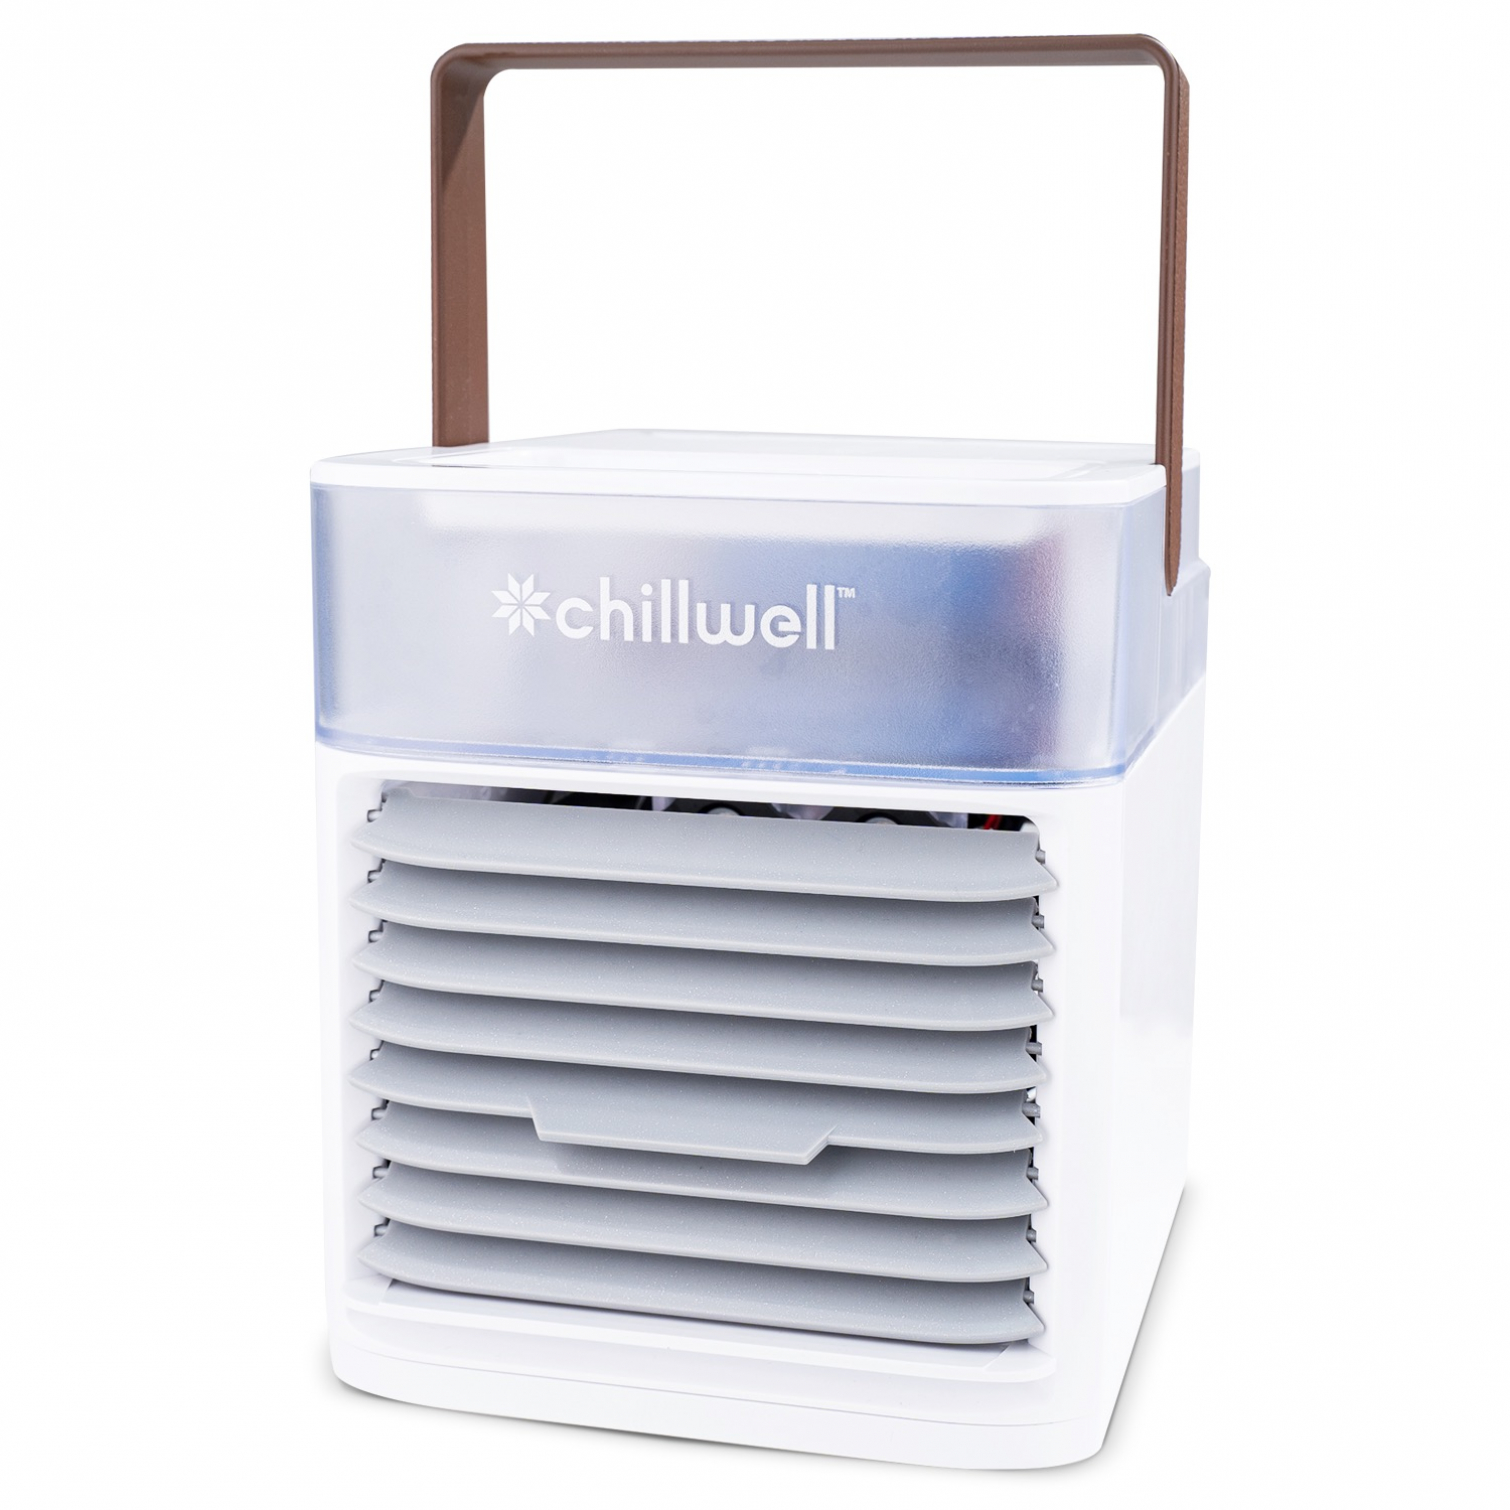 Aircon Chillwell AC Reviews